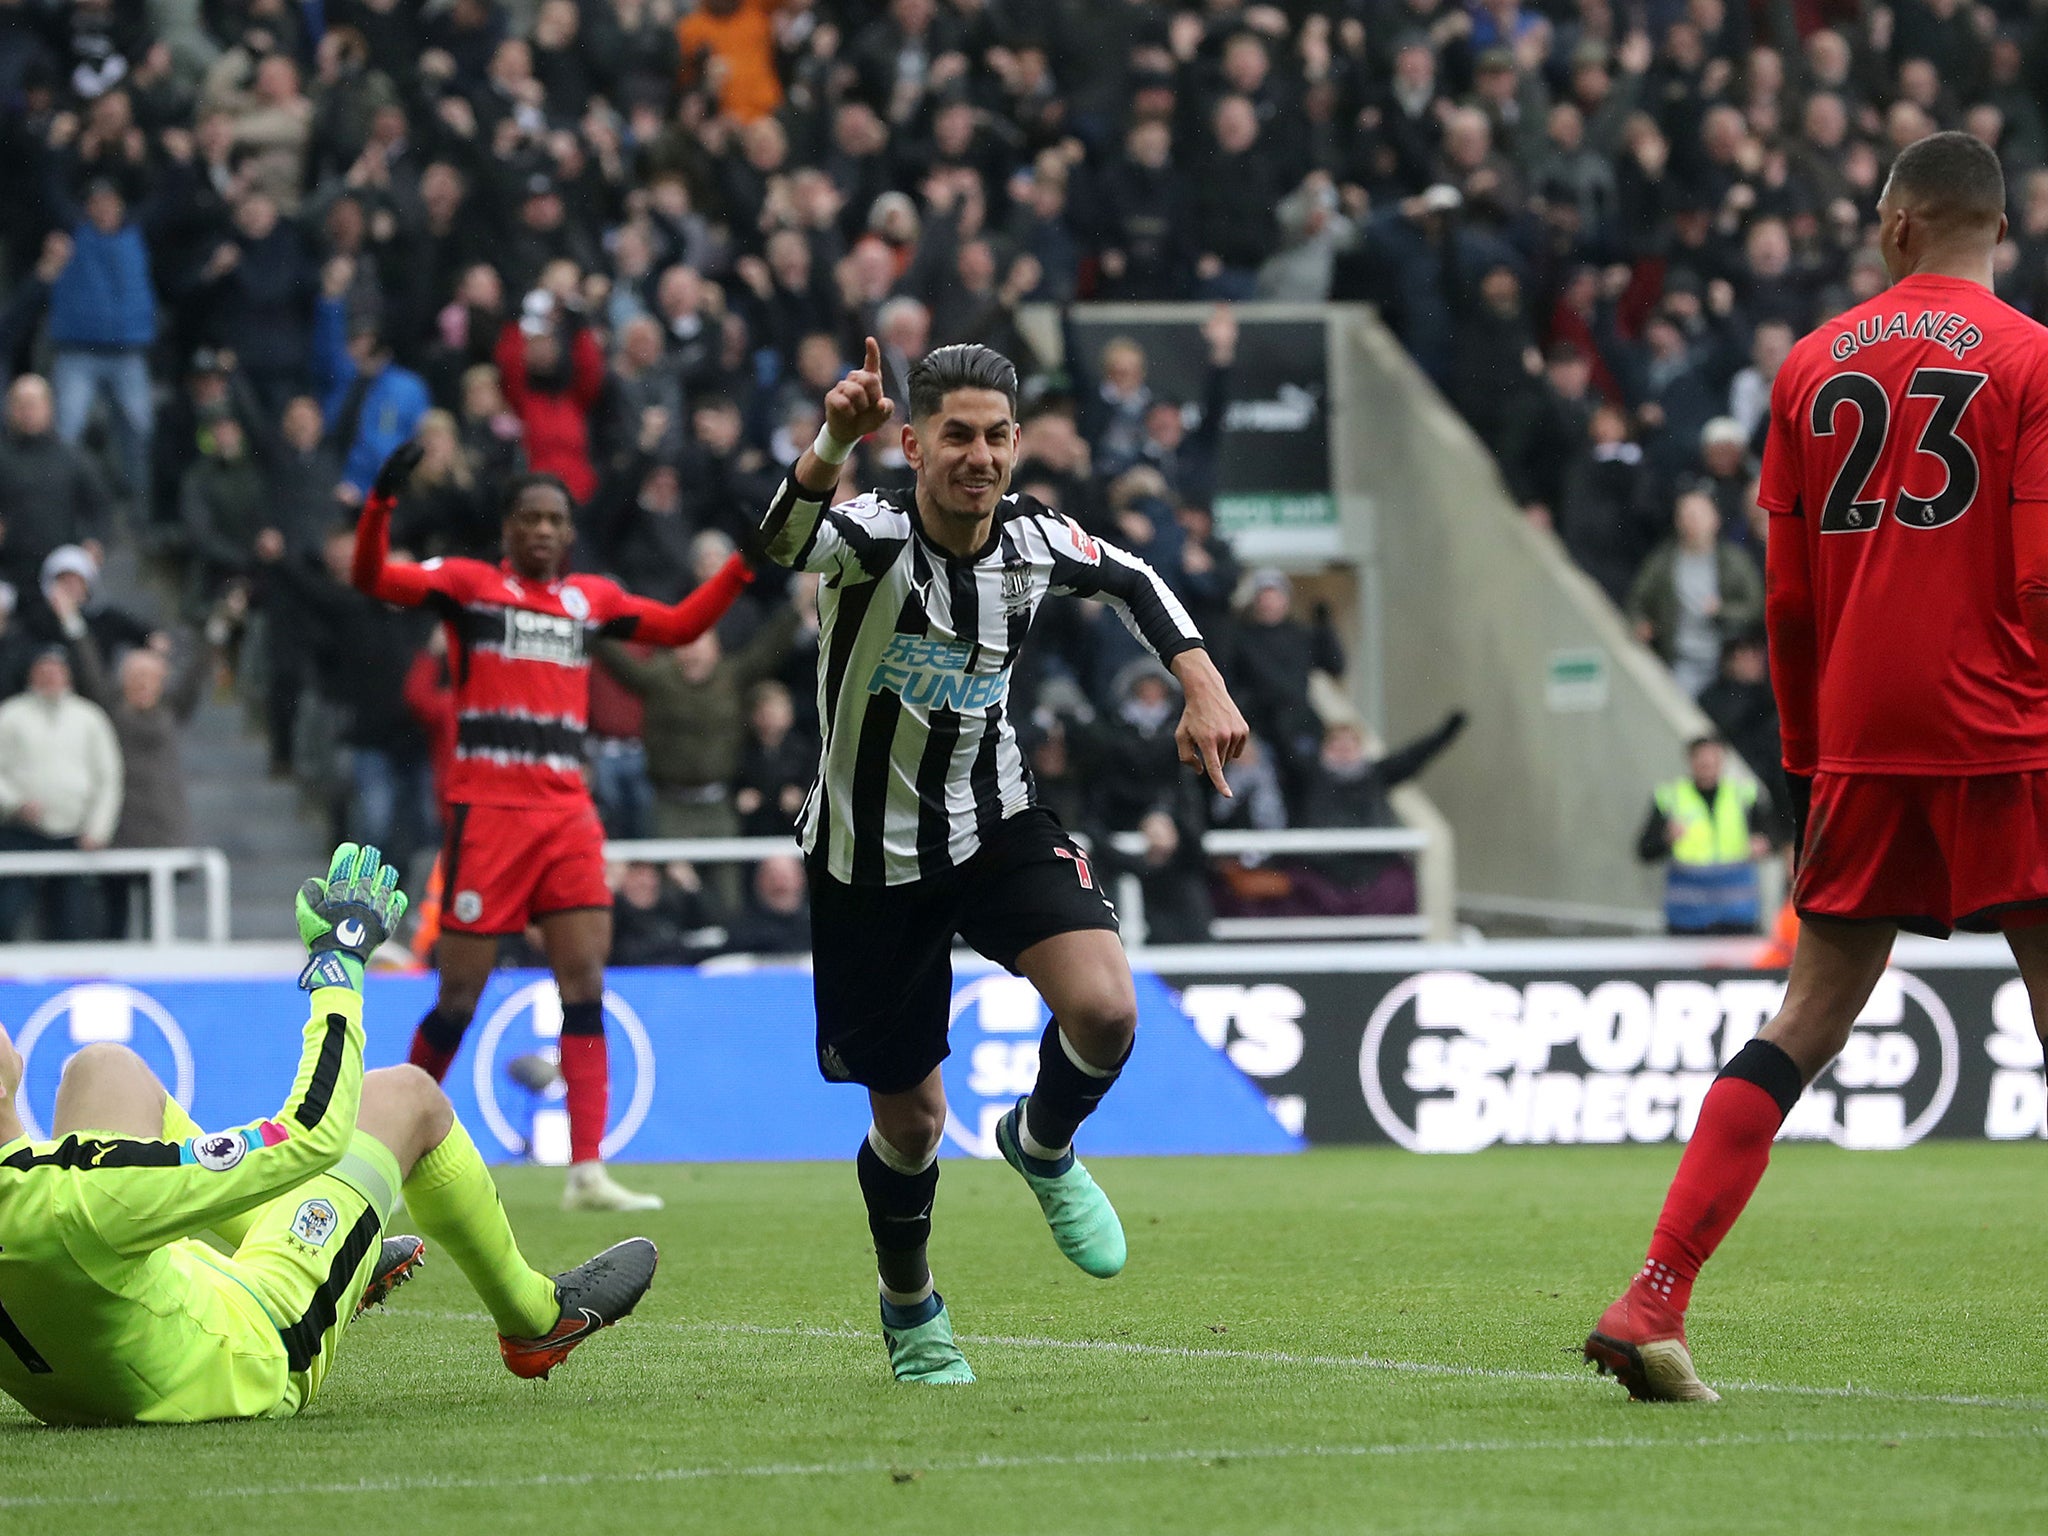 Perez's goal took Newcastle to 35 points and 12th in the league